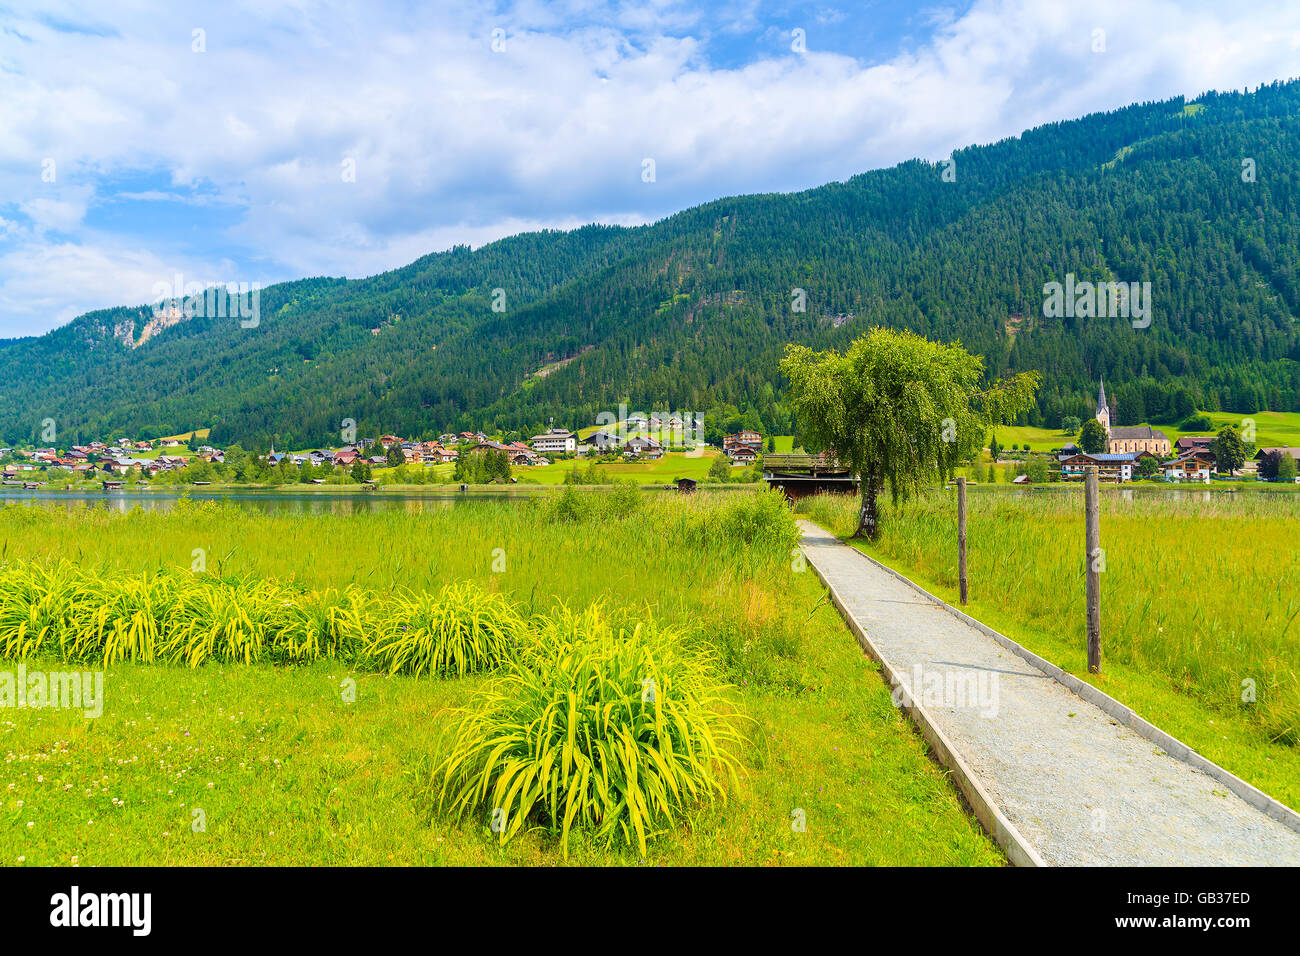 Road along green meadow with alpine village in background in summer landscape of Alps Mountains, Weissensee lake, Austria Stock Photo